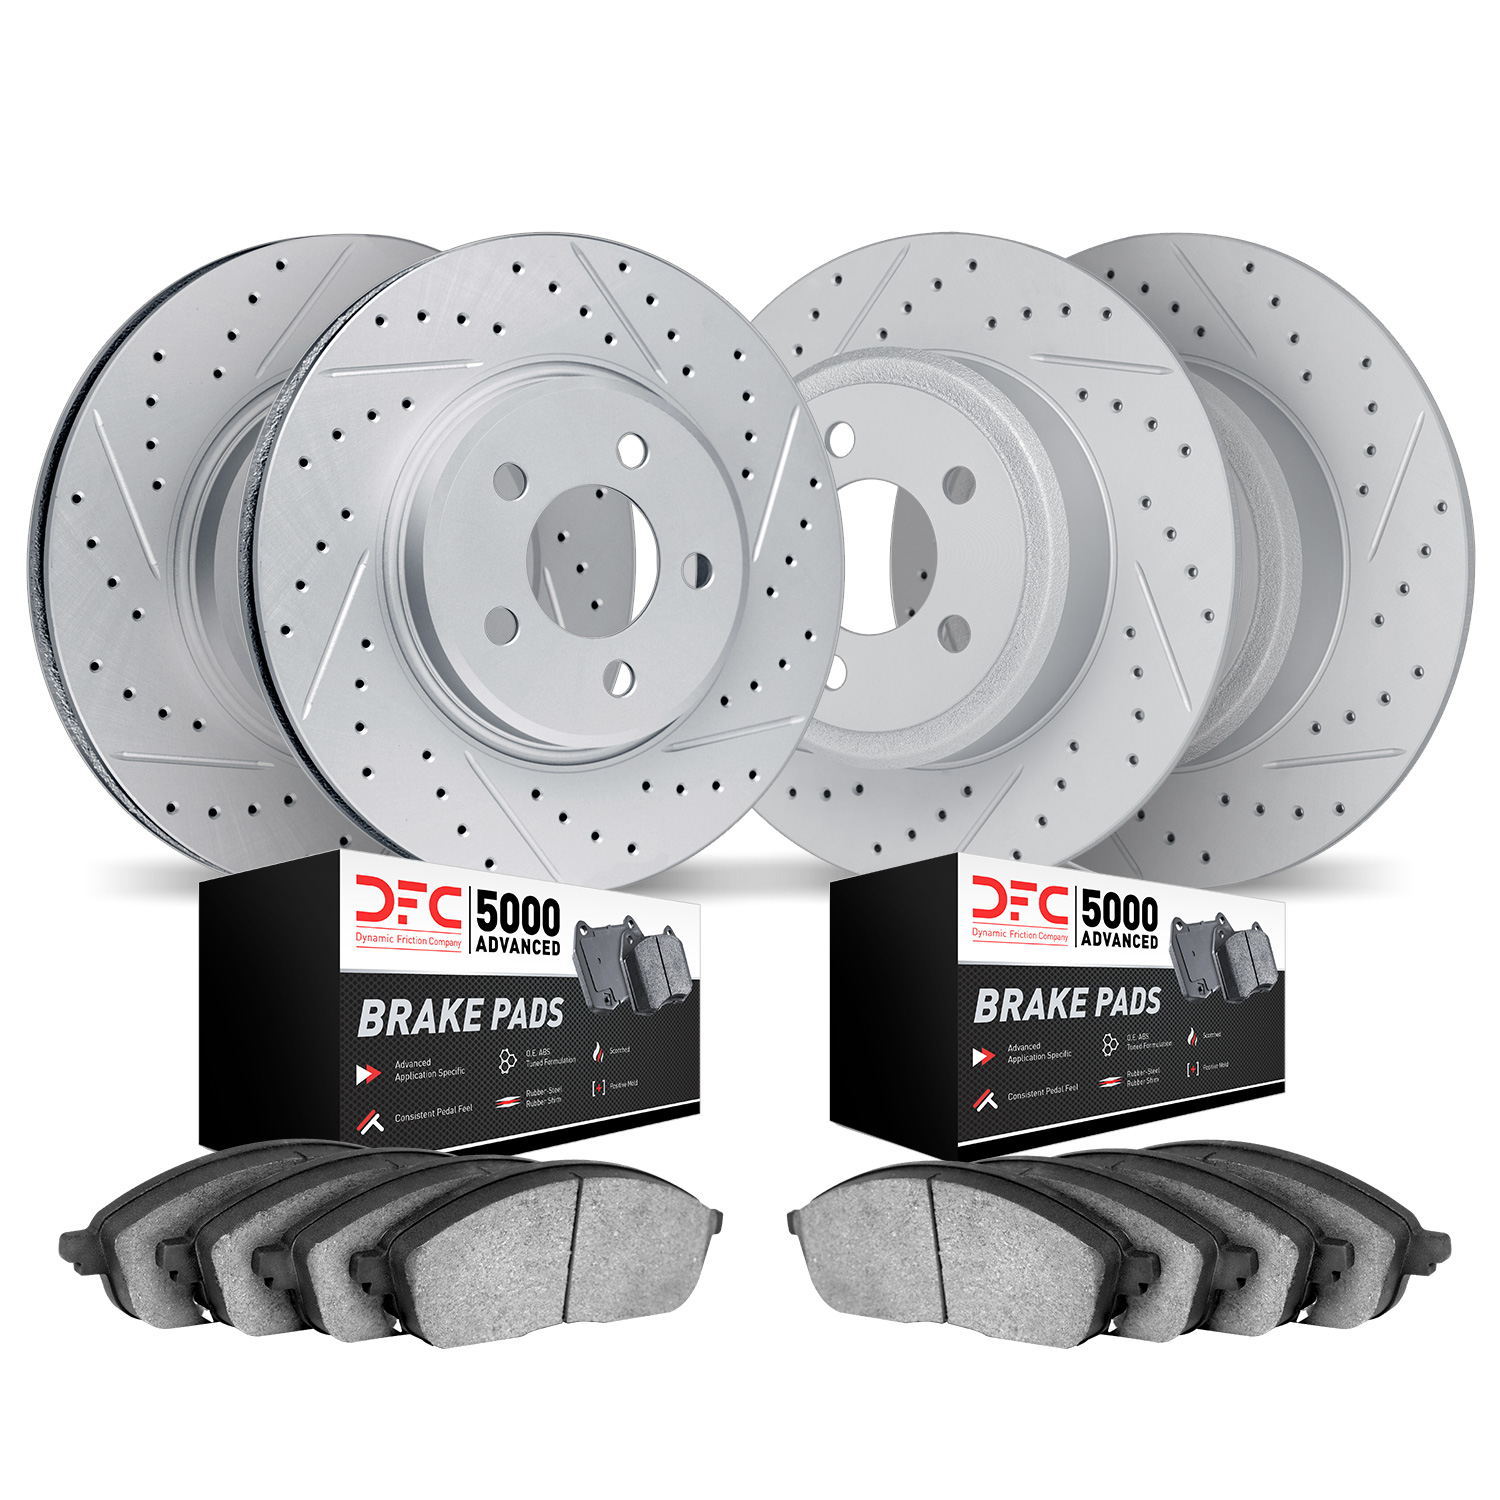 2504-63006 Geoperformance Drilled/Slotted Rotors w/5000 Advanced Brake Pads Kit, 1998-2005 Mercedes-Benz, Position: Front and Re